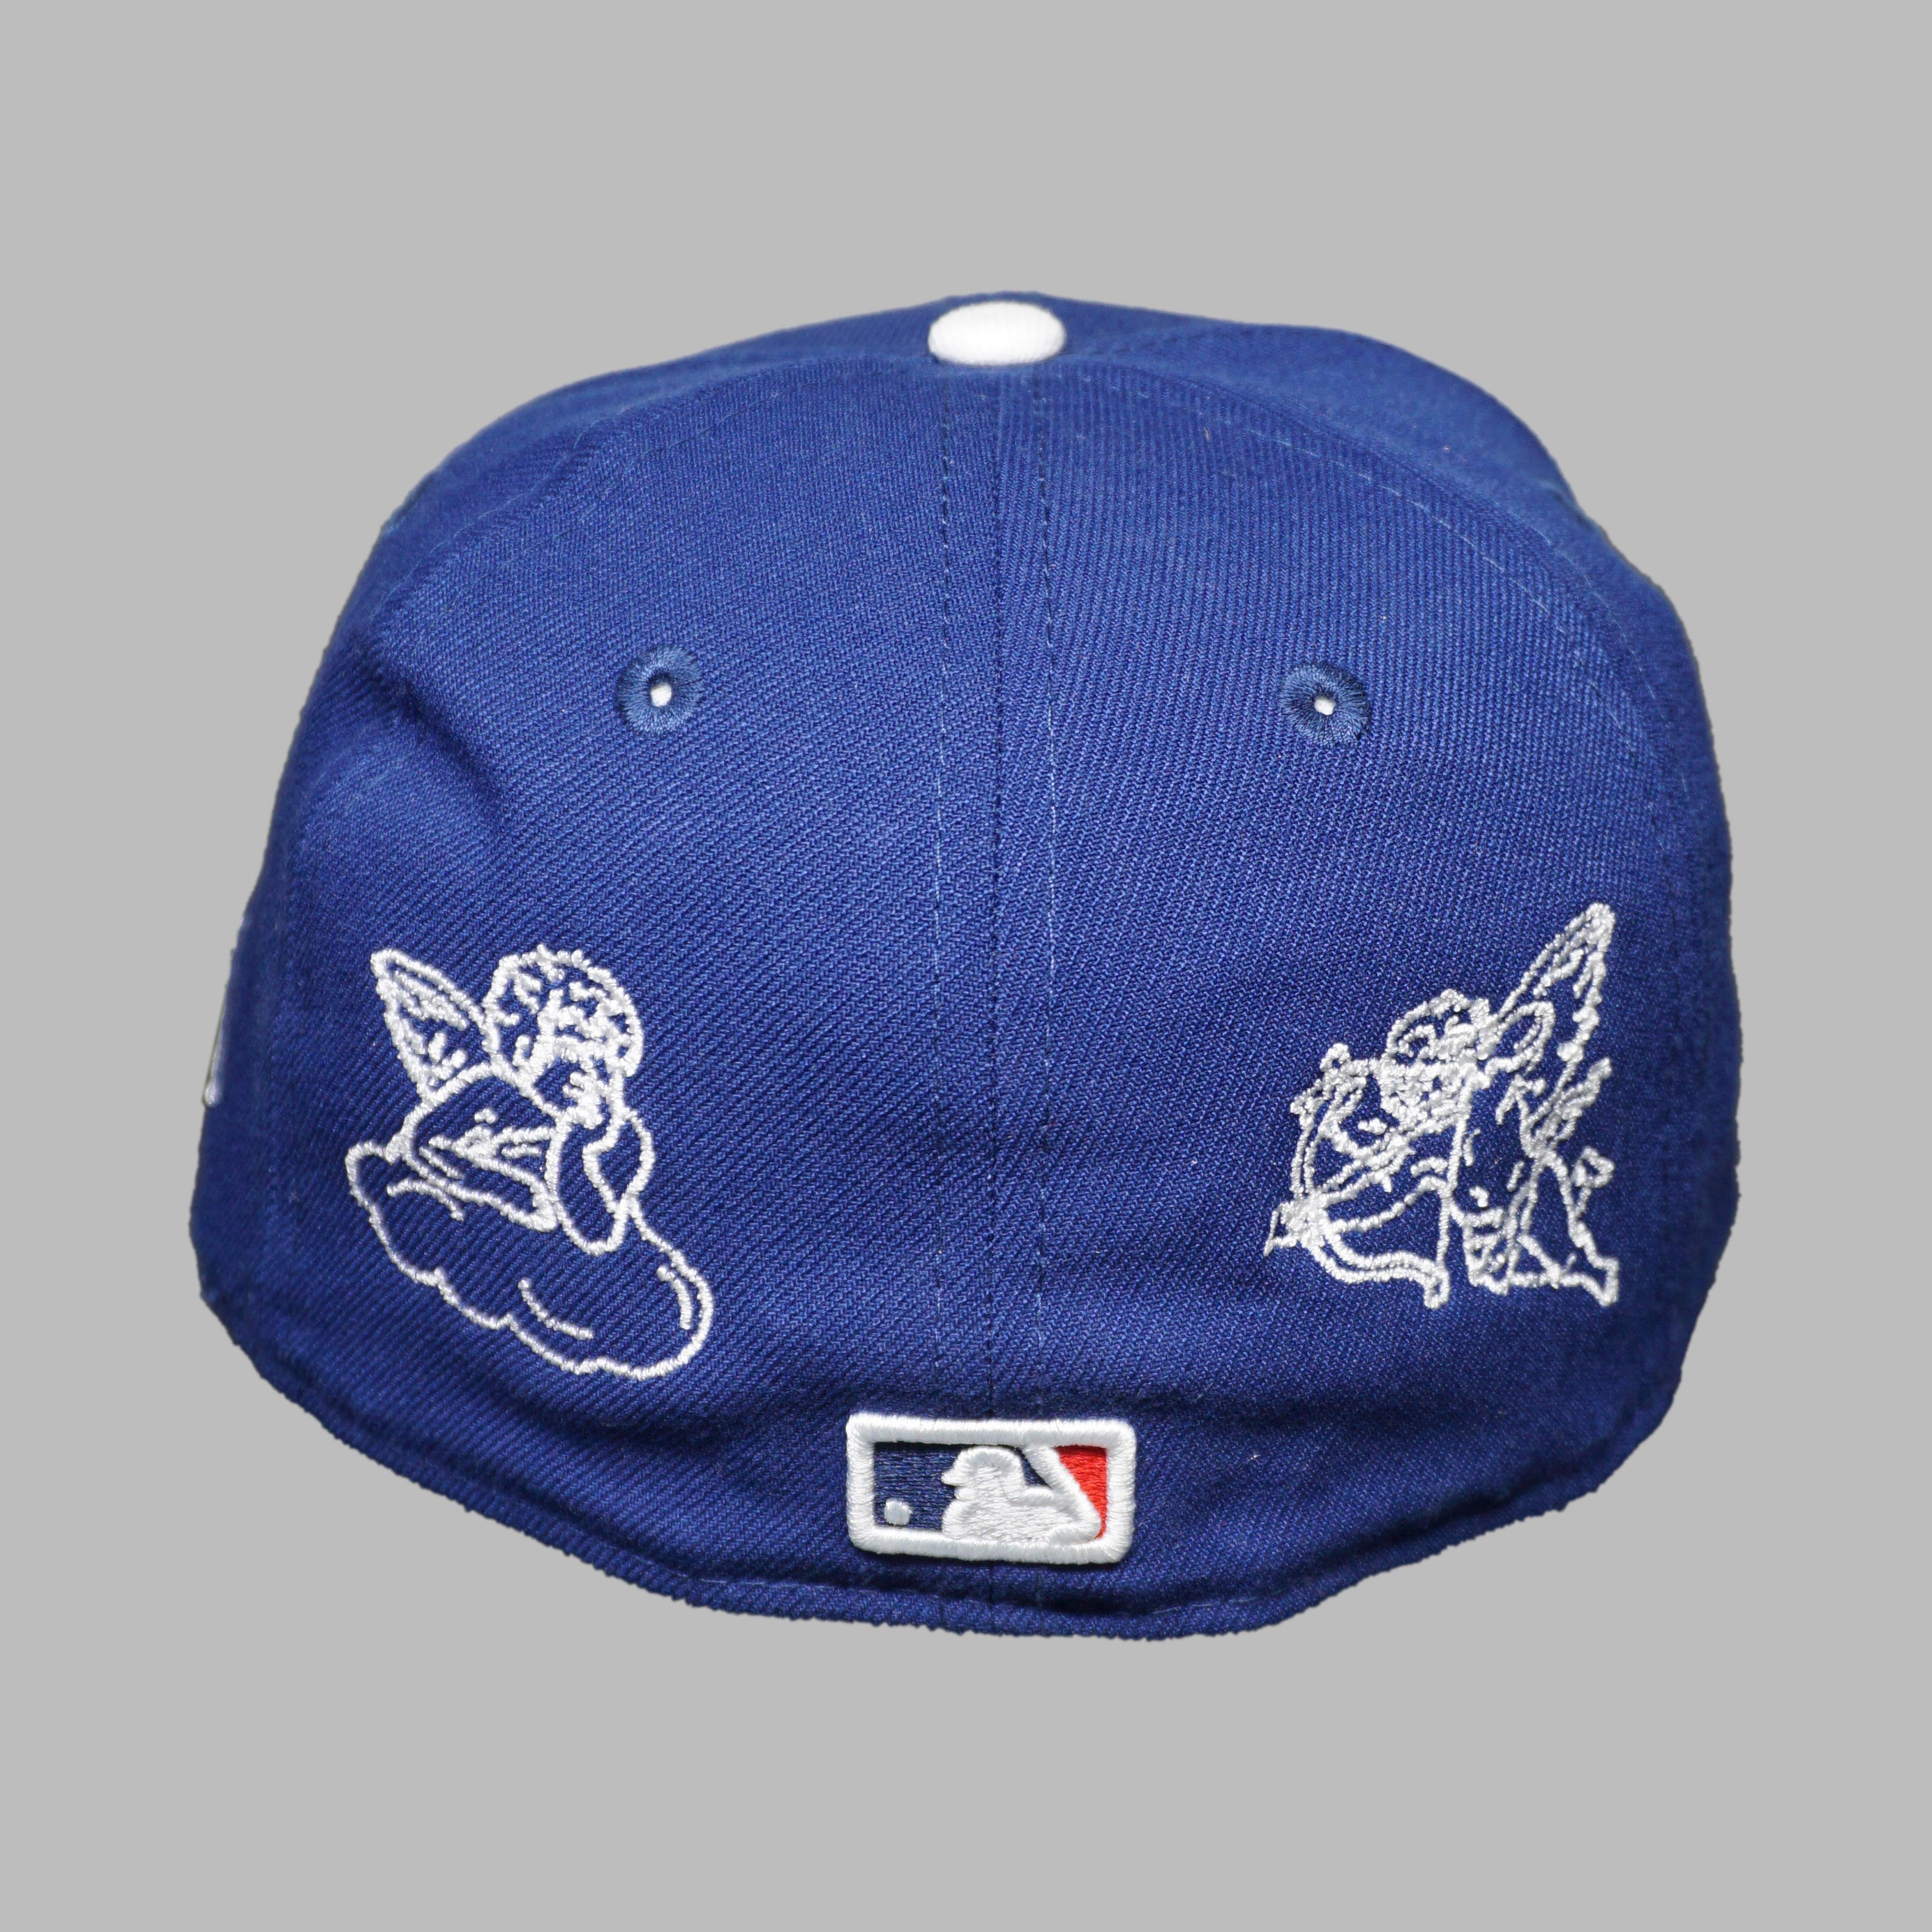 BLUE HOLY FITTED (size 7)